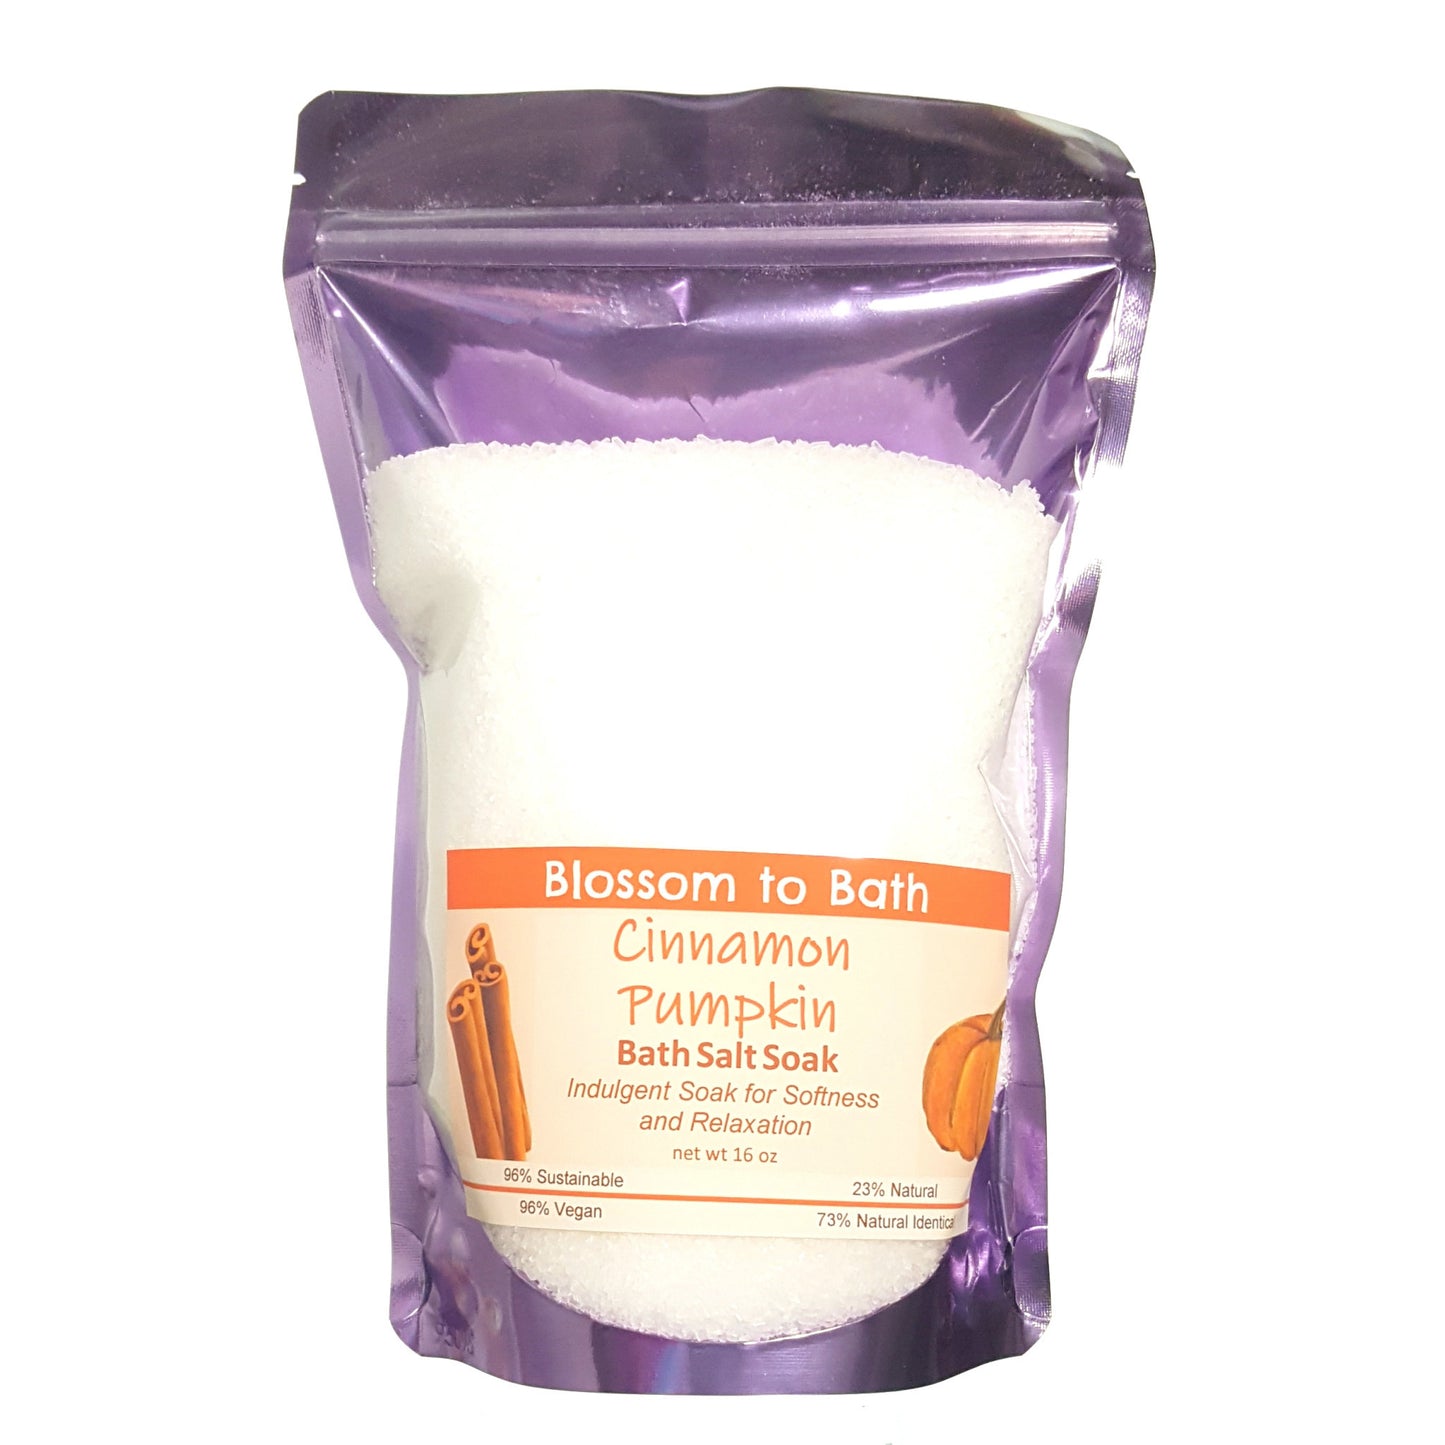 Buy Blossom to Bath Cinnamon Pumpkin Bath Salt Soak from Flowersong Soap Studio.  Scented epsom salts for a luxurious soaking experience  An engaging, cheerful scent filled with sweet vanilla and warm spice.